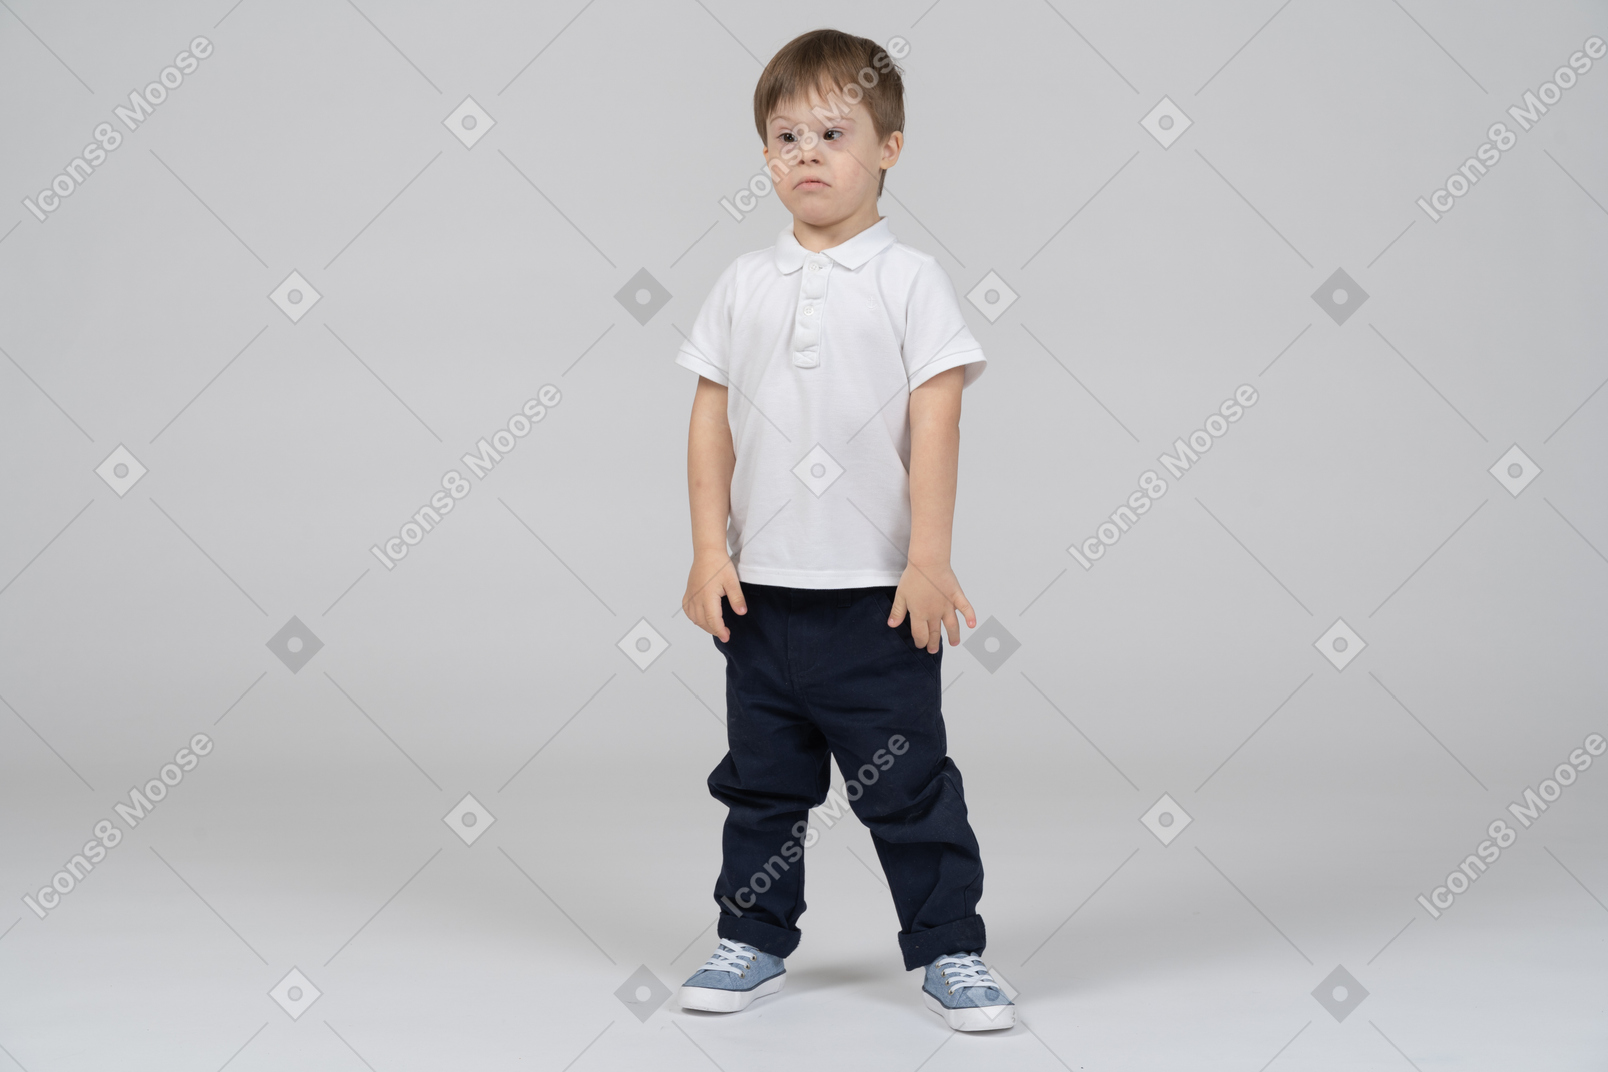 Sad little boy standing with arms at sides